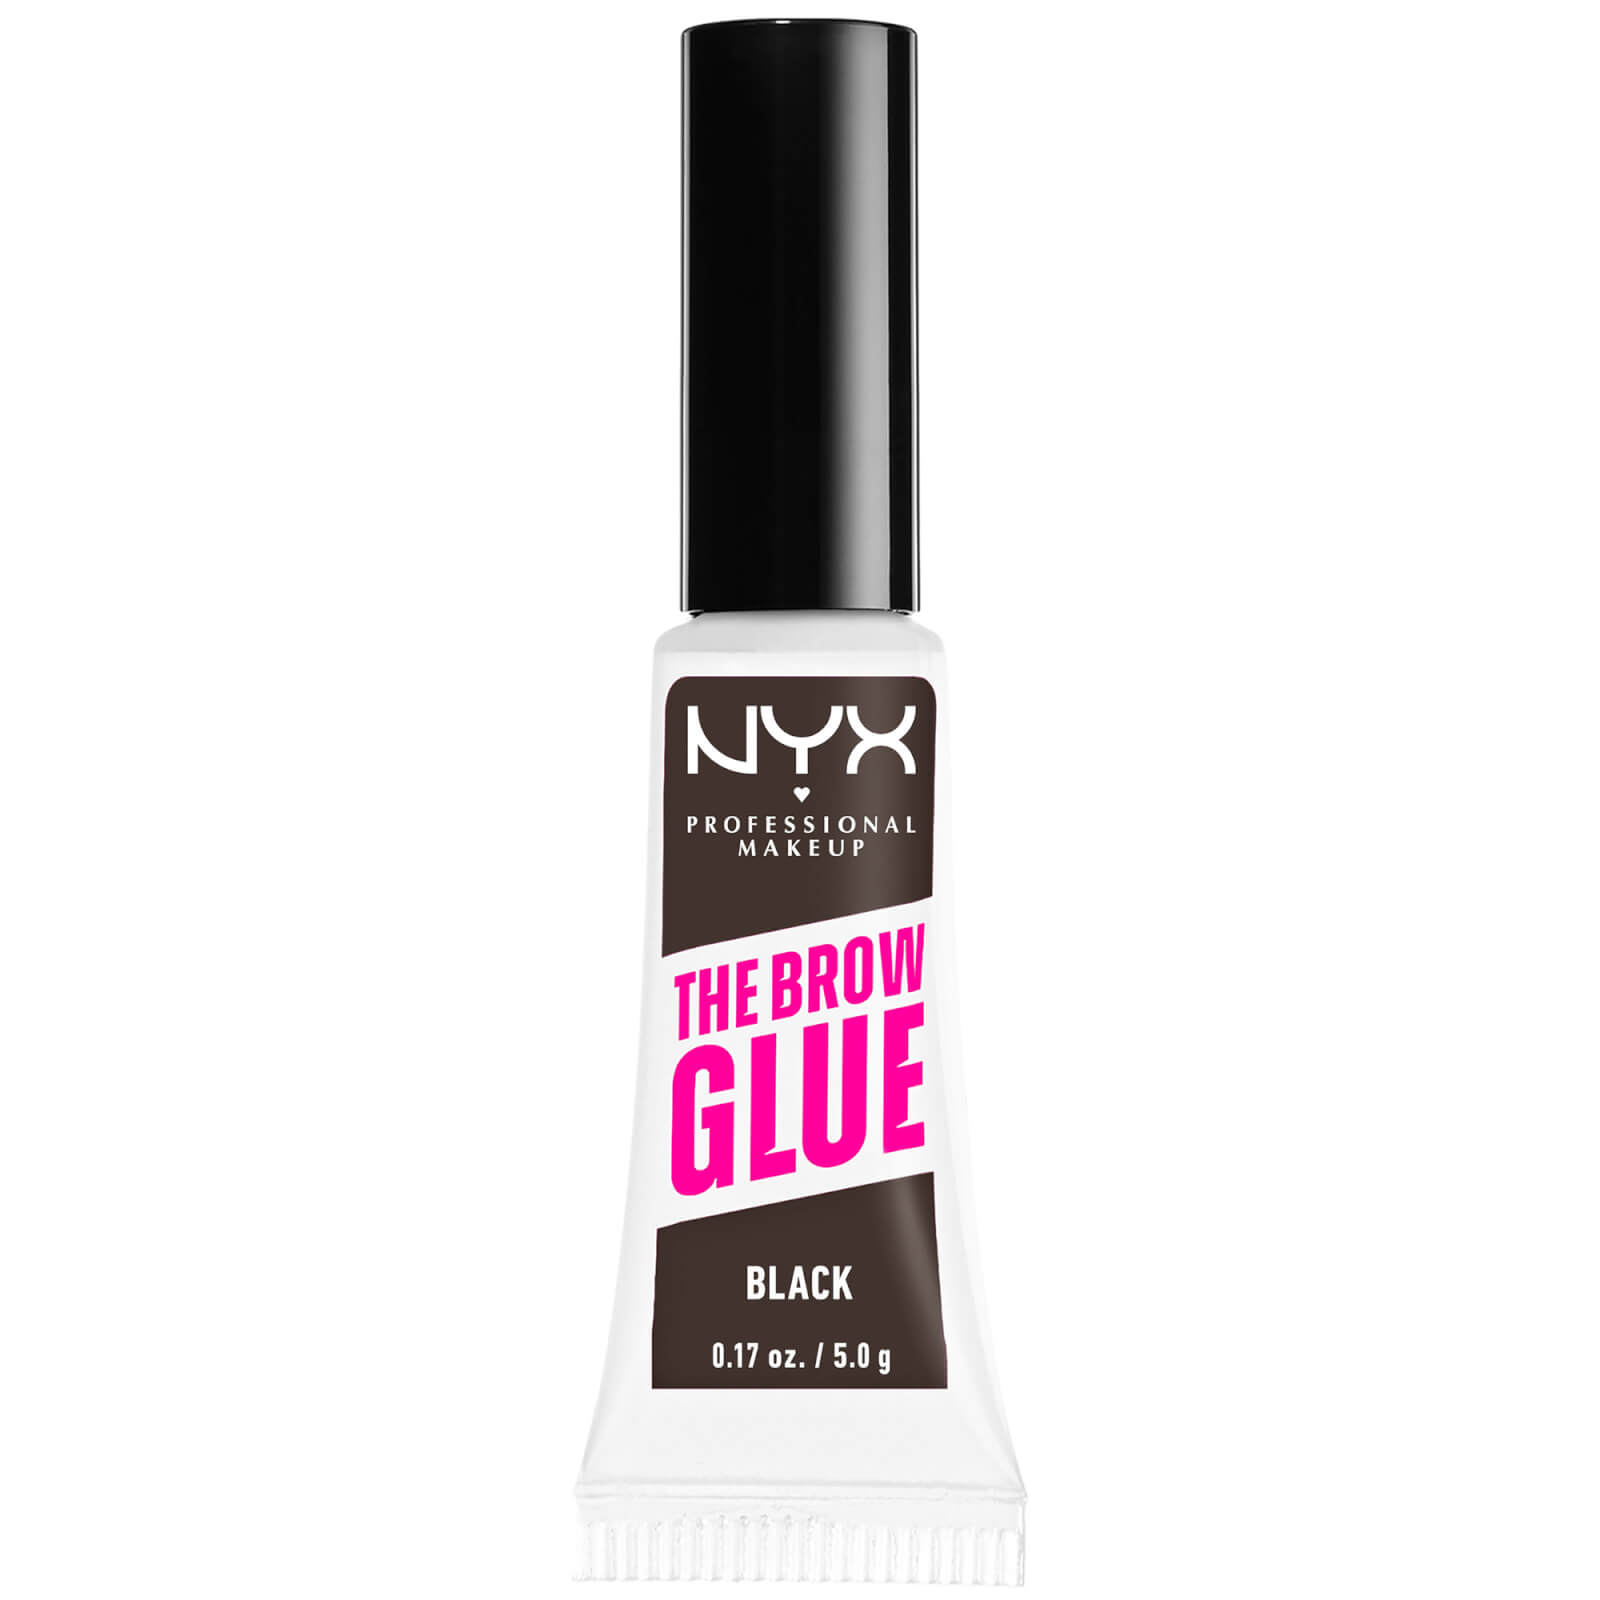 Nyx Professional Makeup The Brow Glue Instant Styler 5g (various Shades) - Black In White